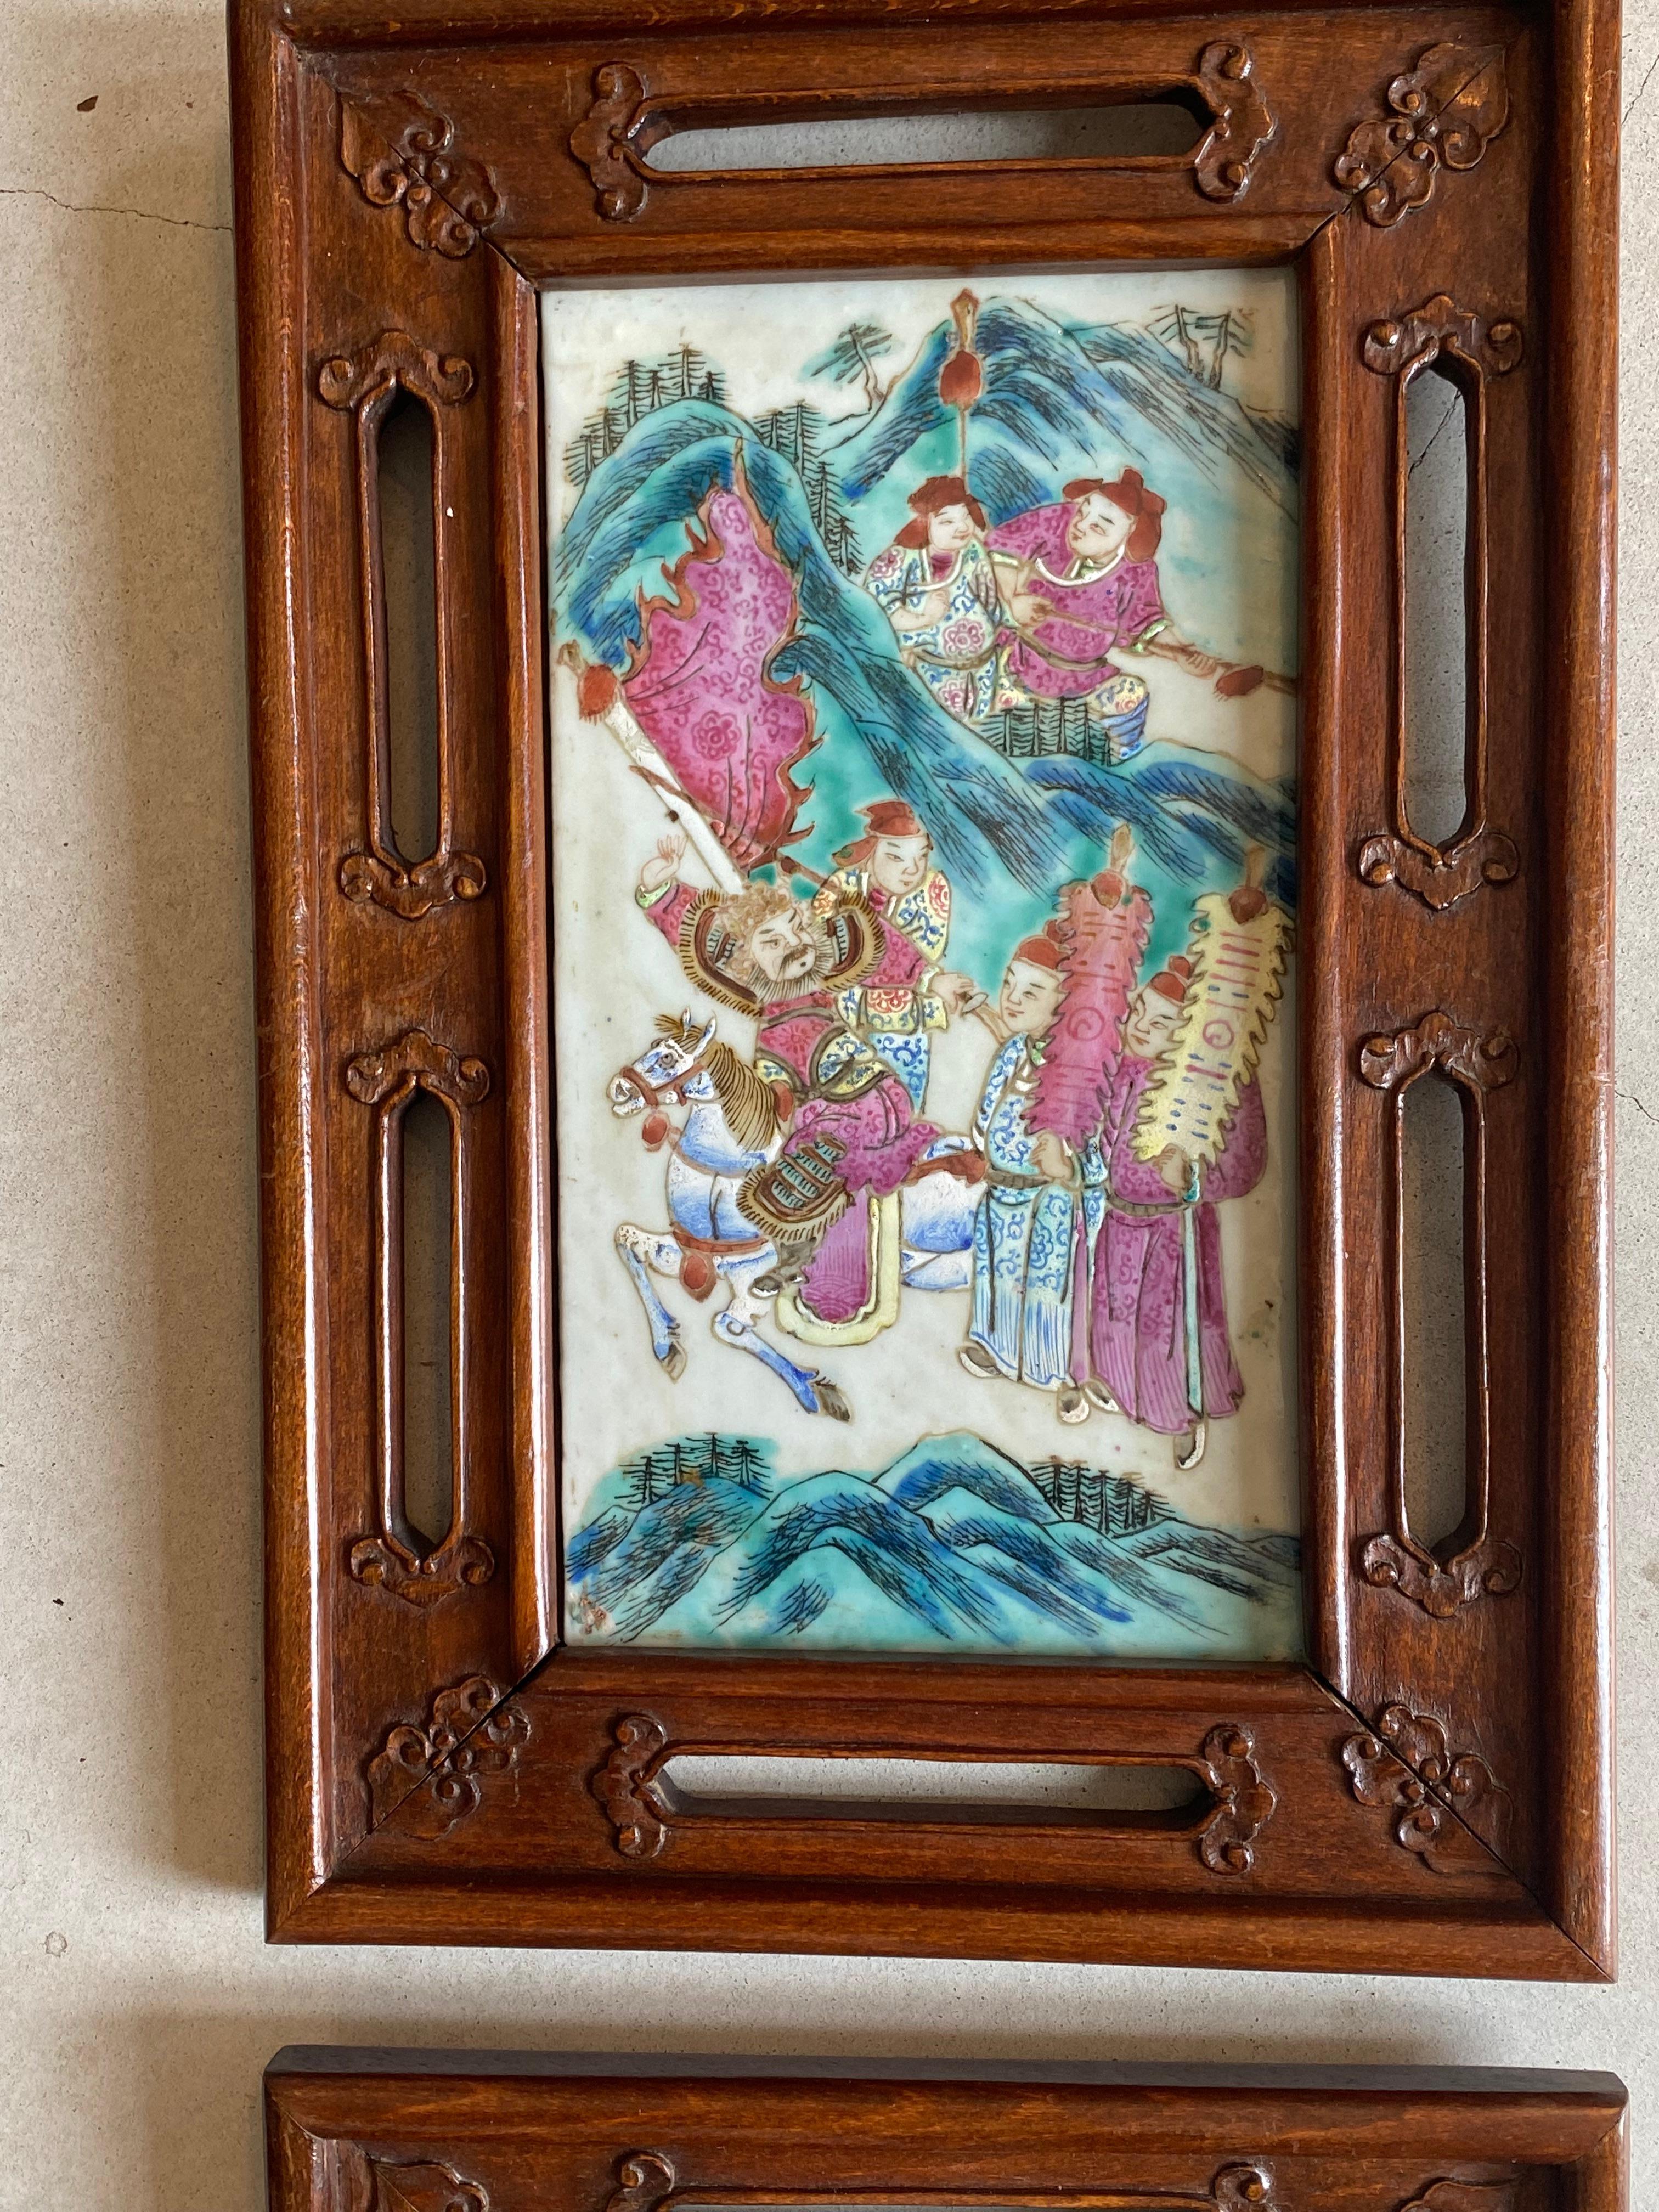 Ths Set of 3 (three) is hand painted in the traditional way of Asian porcelain painting by hand in th 1900's century. Very colorful having rosewood hand made frames and picturing Warriors in each.